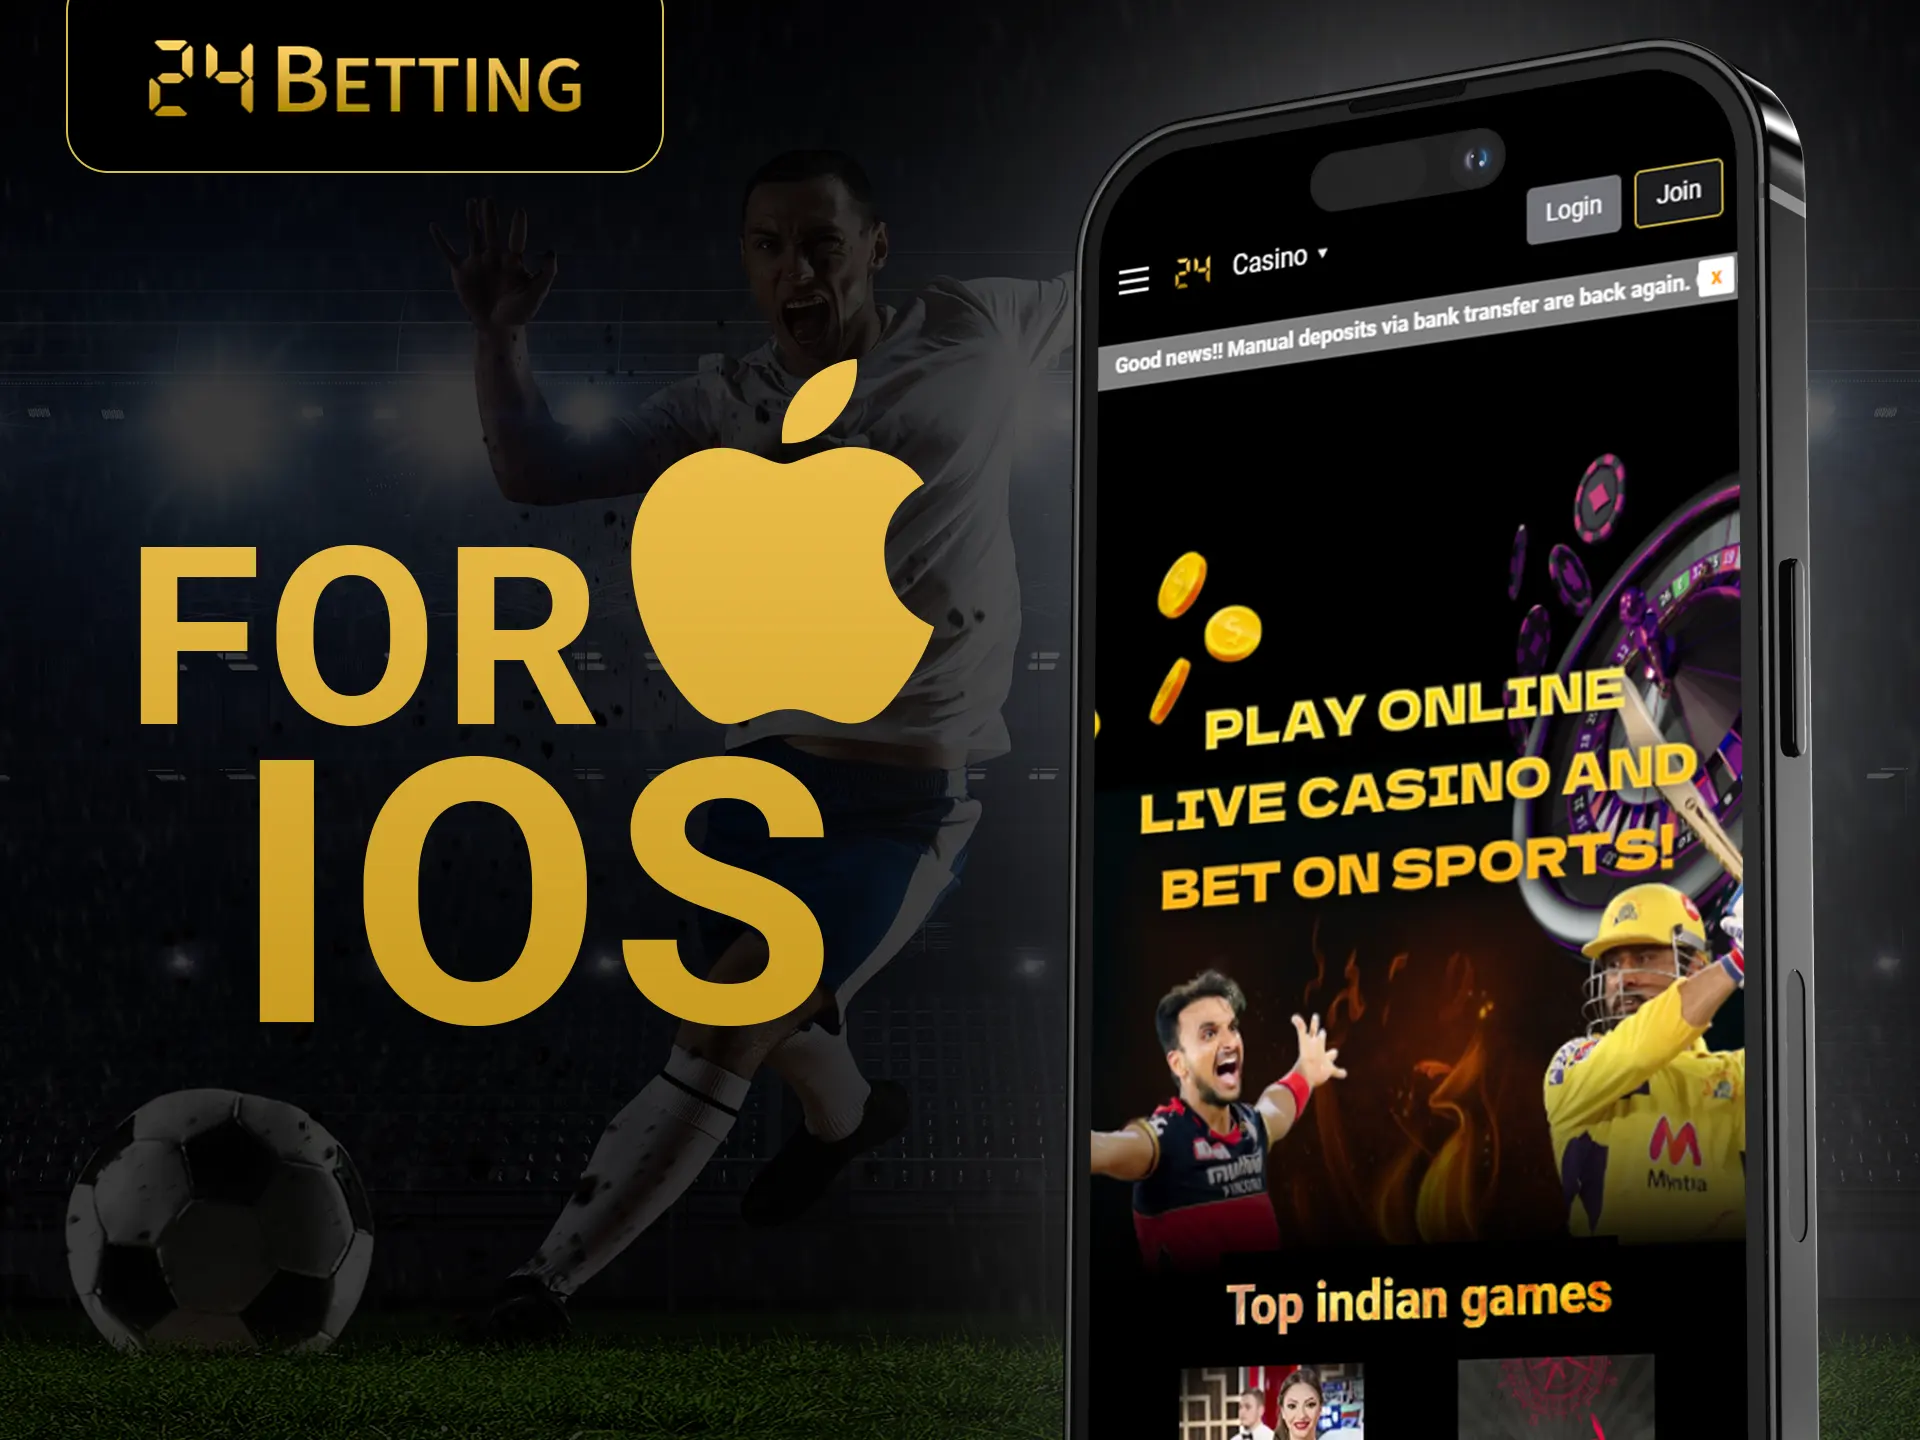 You can easily bet on cricket on 24betting from your iOS device.